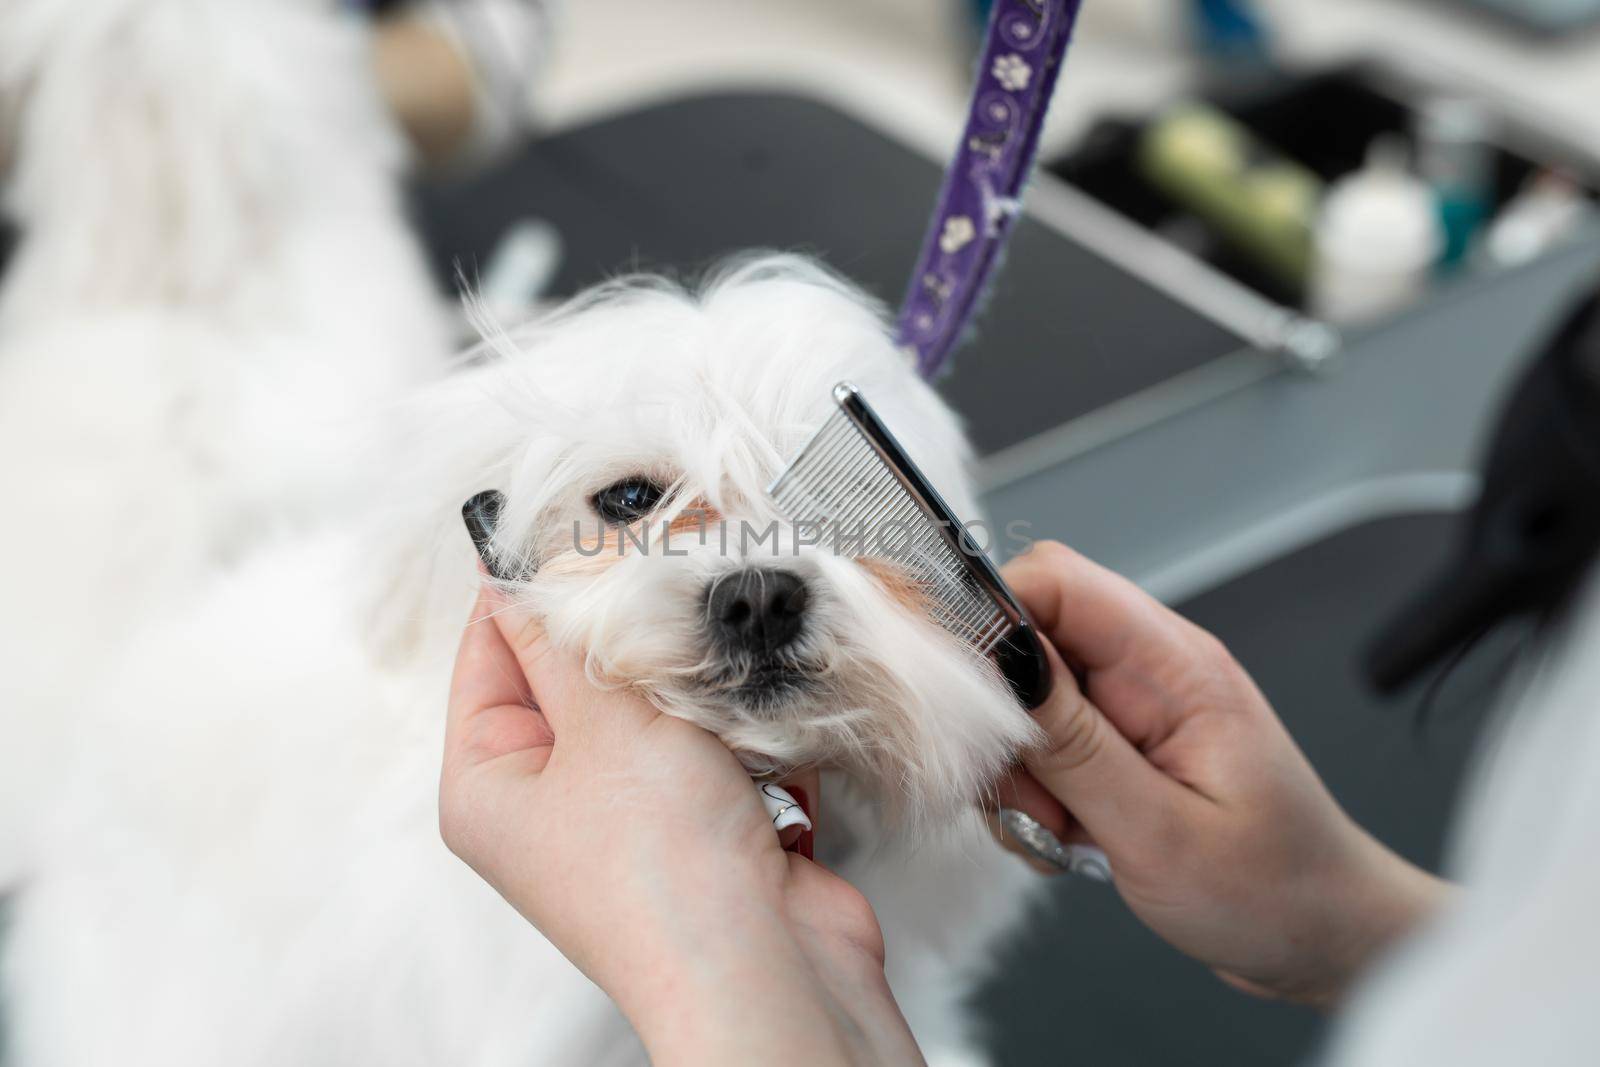 Grooming animals, grooming, drying and styling dogs, combing wool. Grooming master cuts and shaves, cares for a dog. Beautiful Bolonka Bolognese.